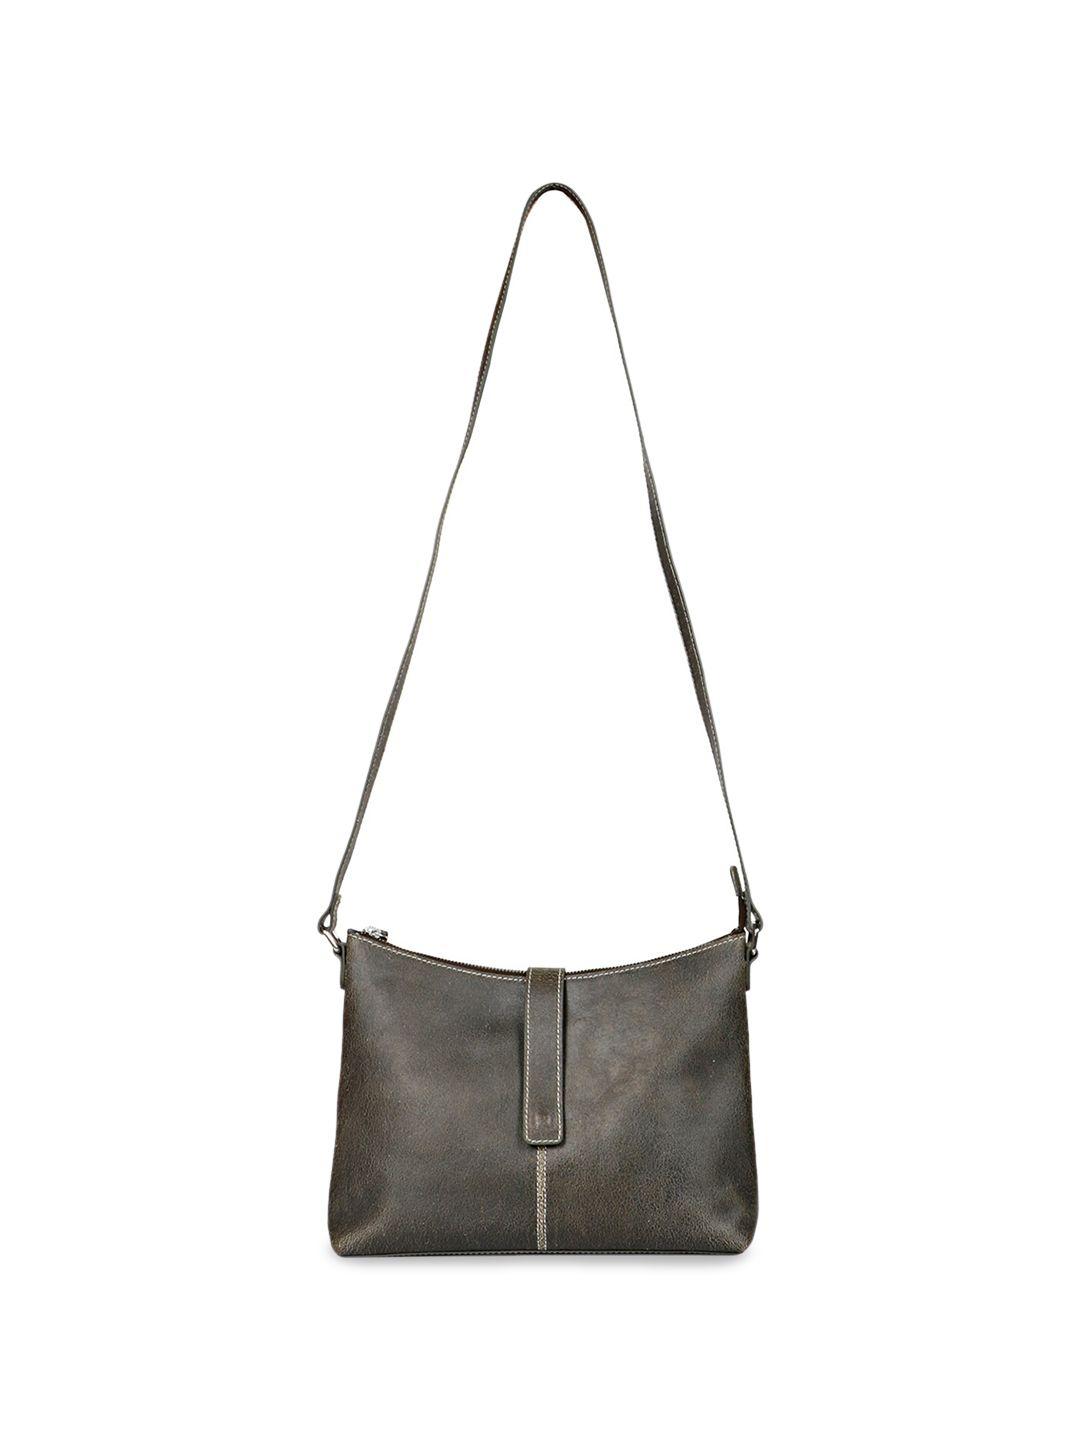 saint g textured leather structured hobo bag